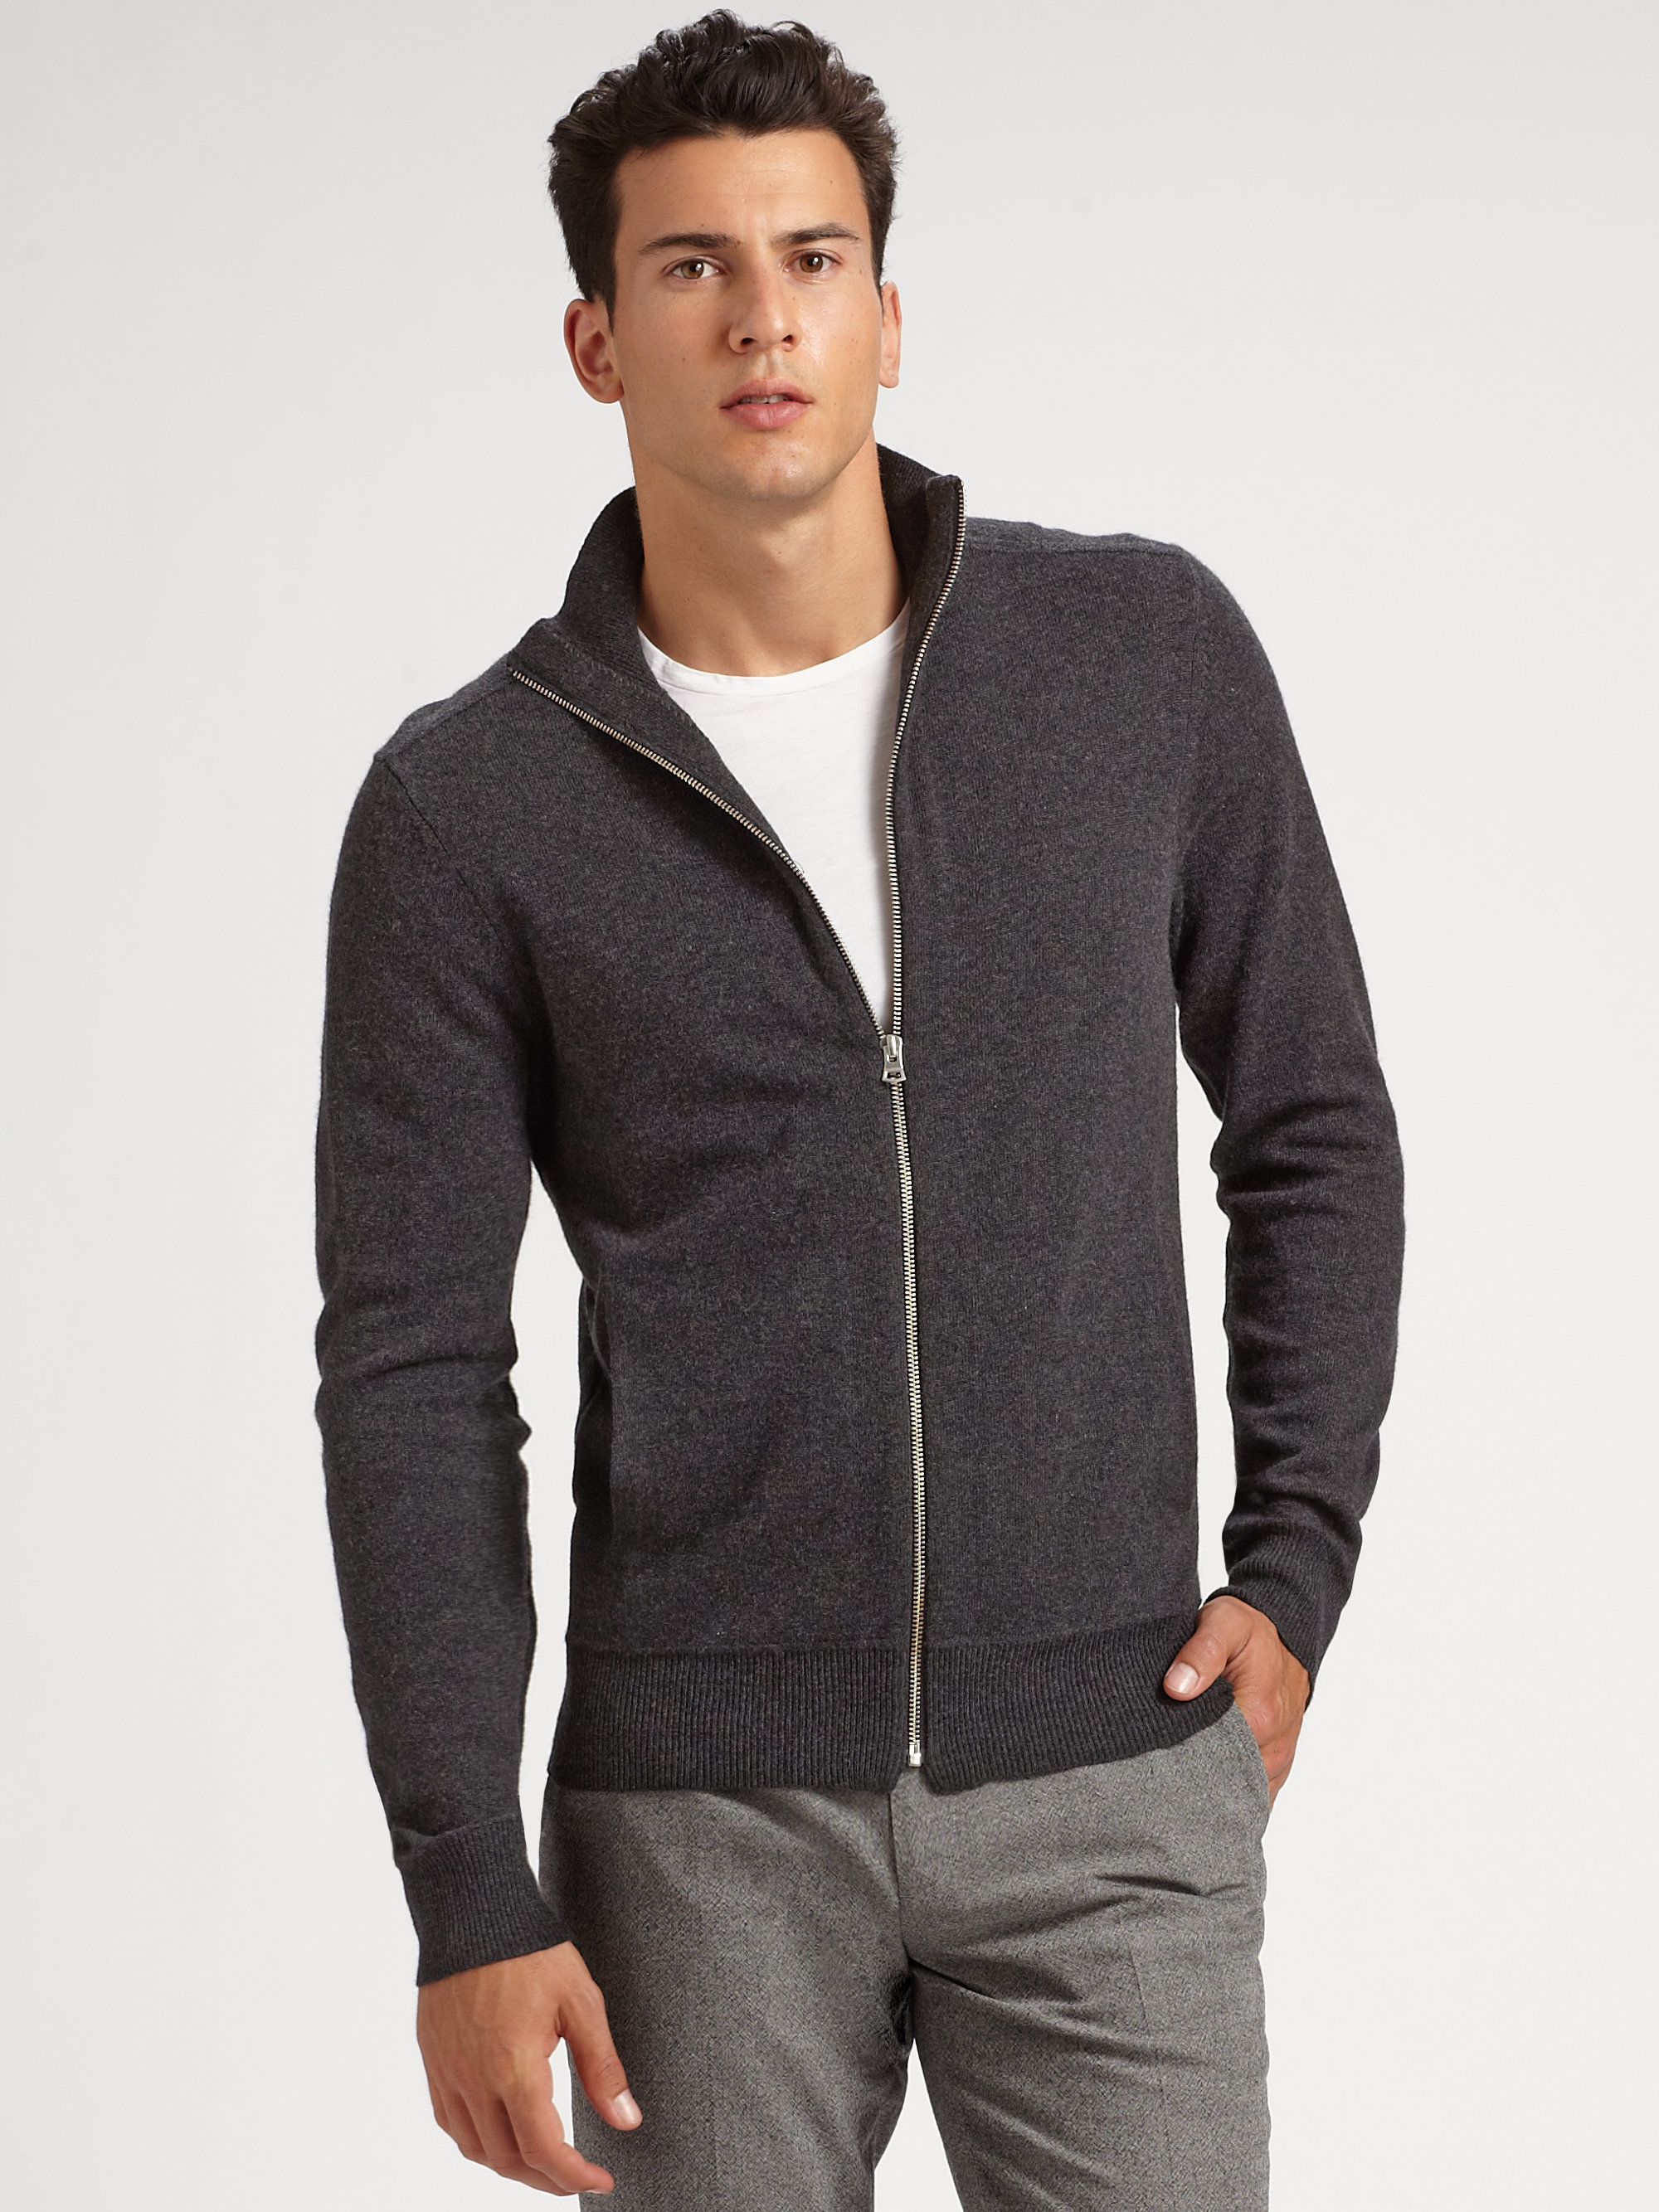 Lyst - Theory Whitford Rj Cashmere Cardigan in Black for Men